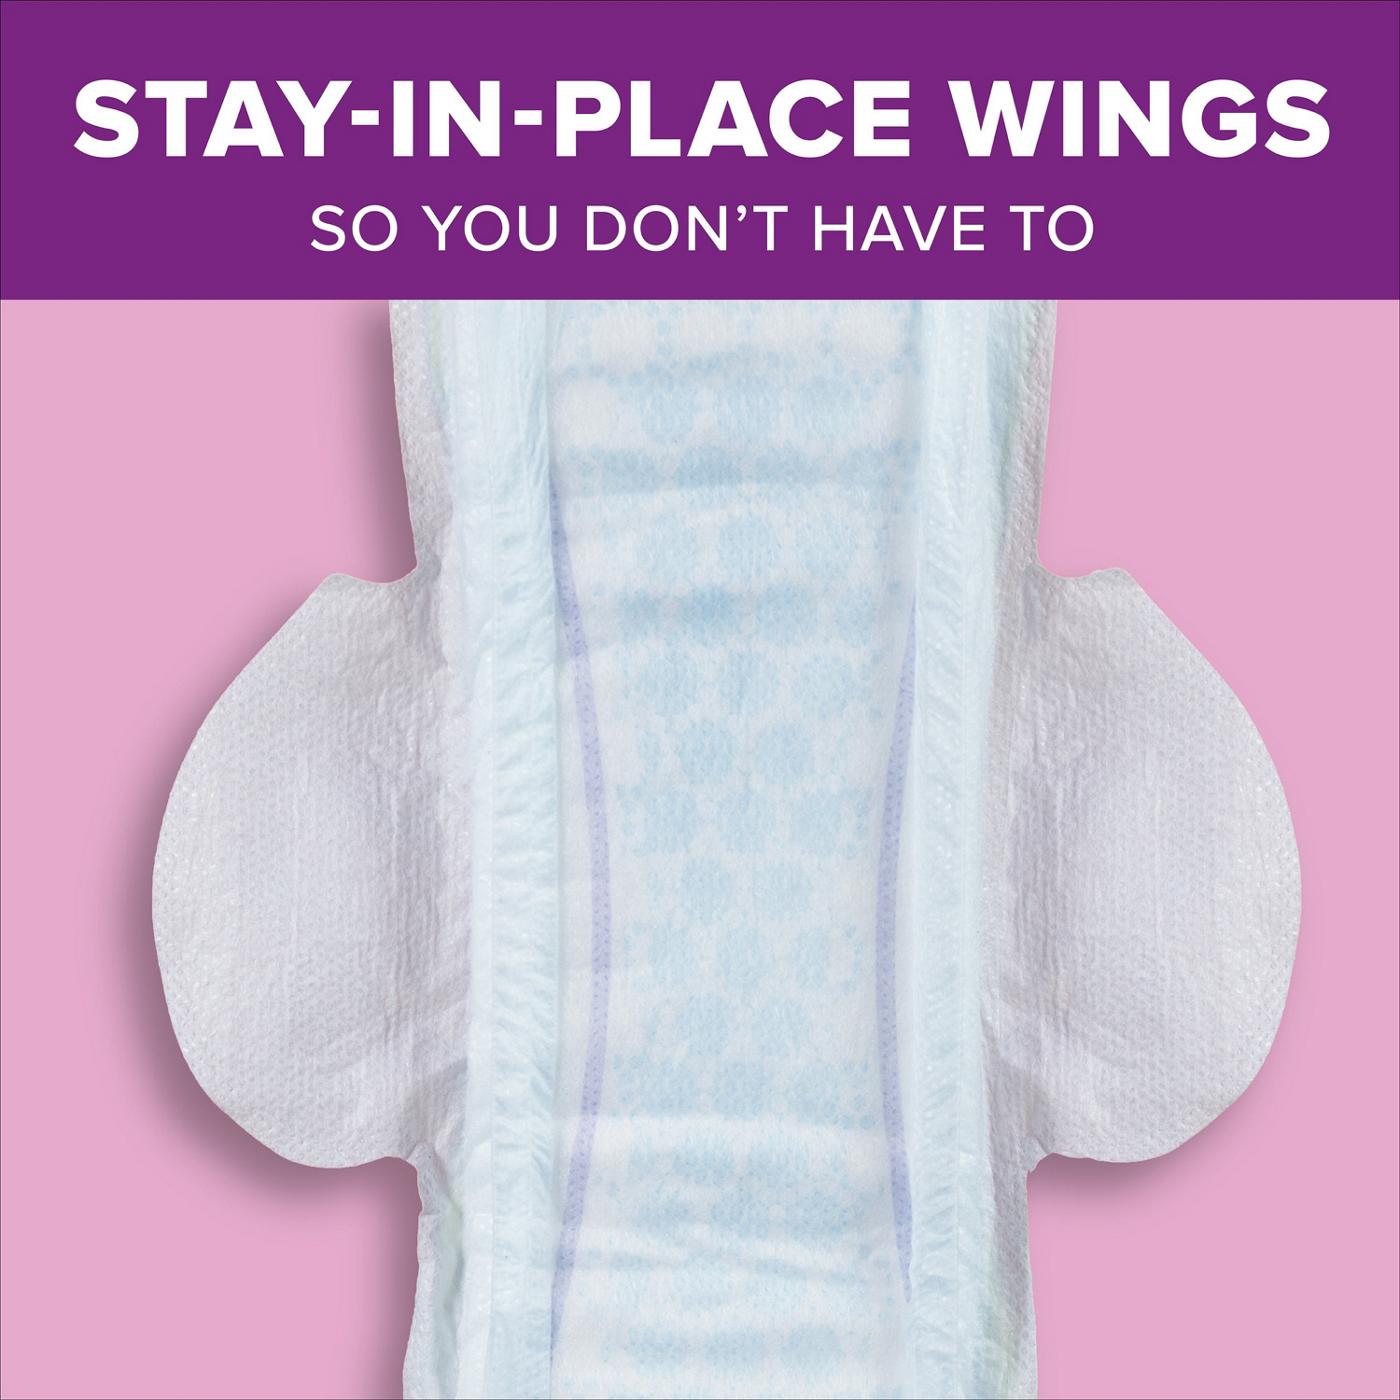 Poise Ultra Thin Long Length Incontinence Pads with Wings - 5 Drop Maximum; image 4 of 6